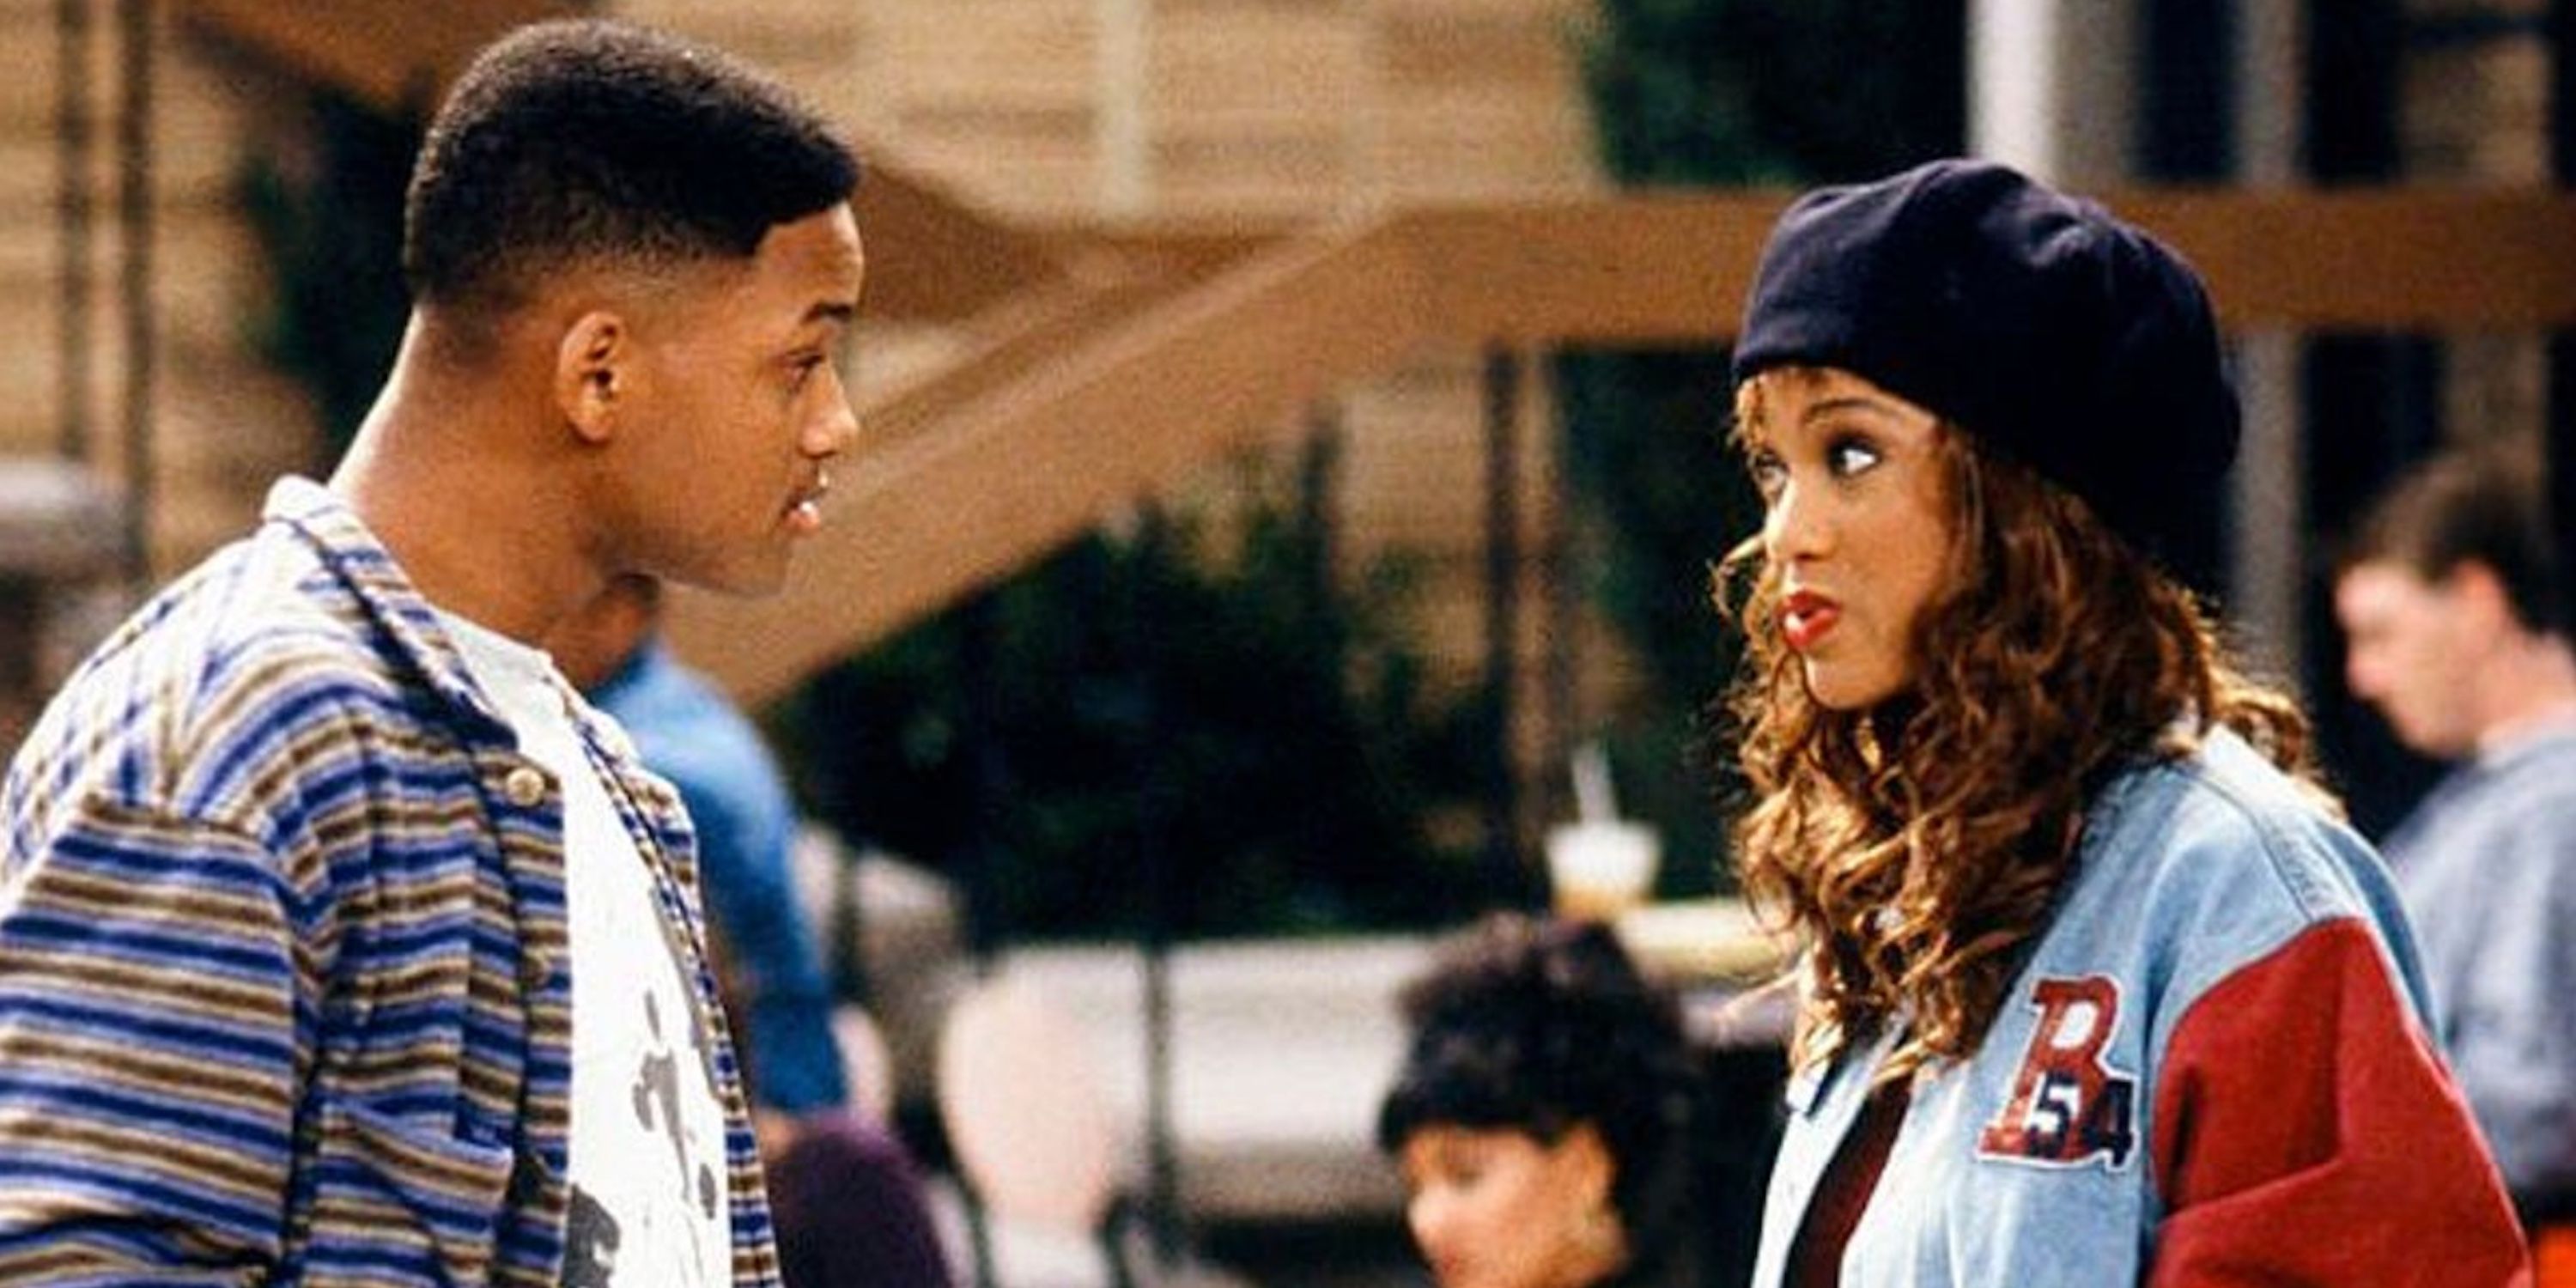 Will Smith and Tyra Banks in The Fresh Prince of Bel-Air Season 4